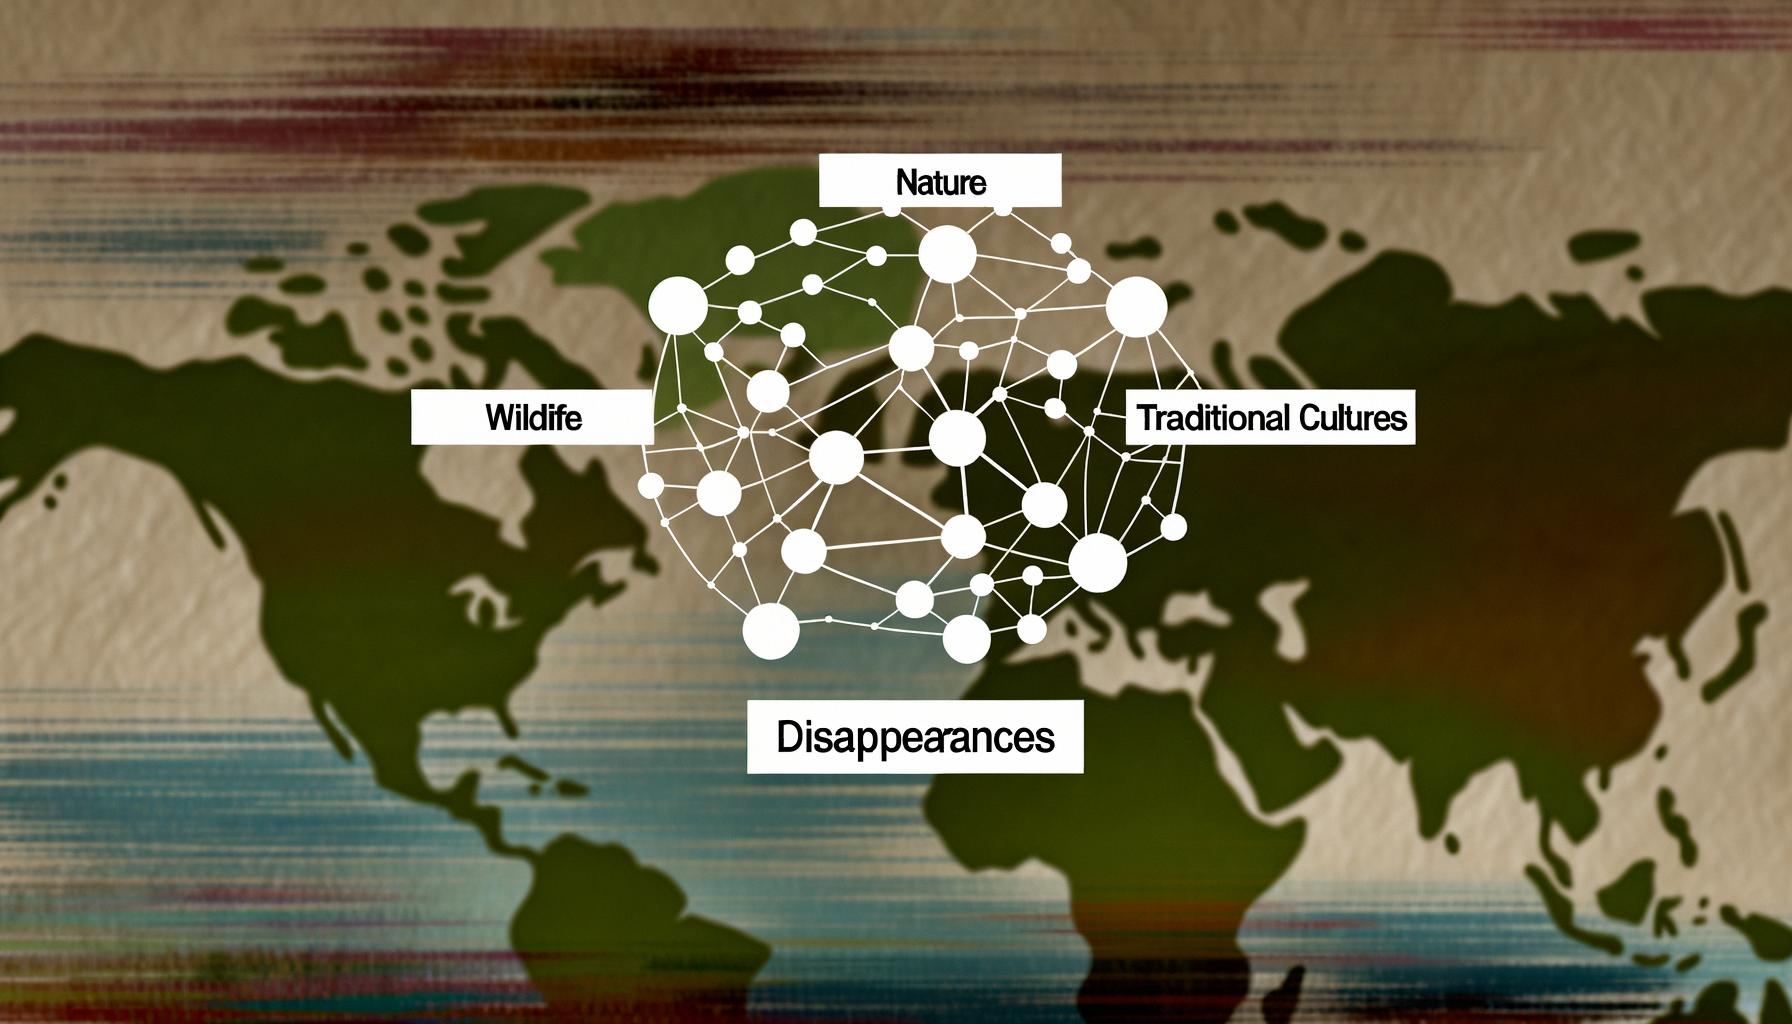 Global issues of disappearances across various domains